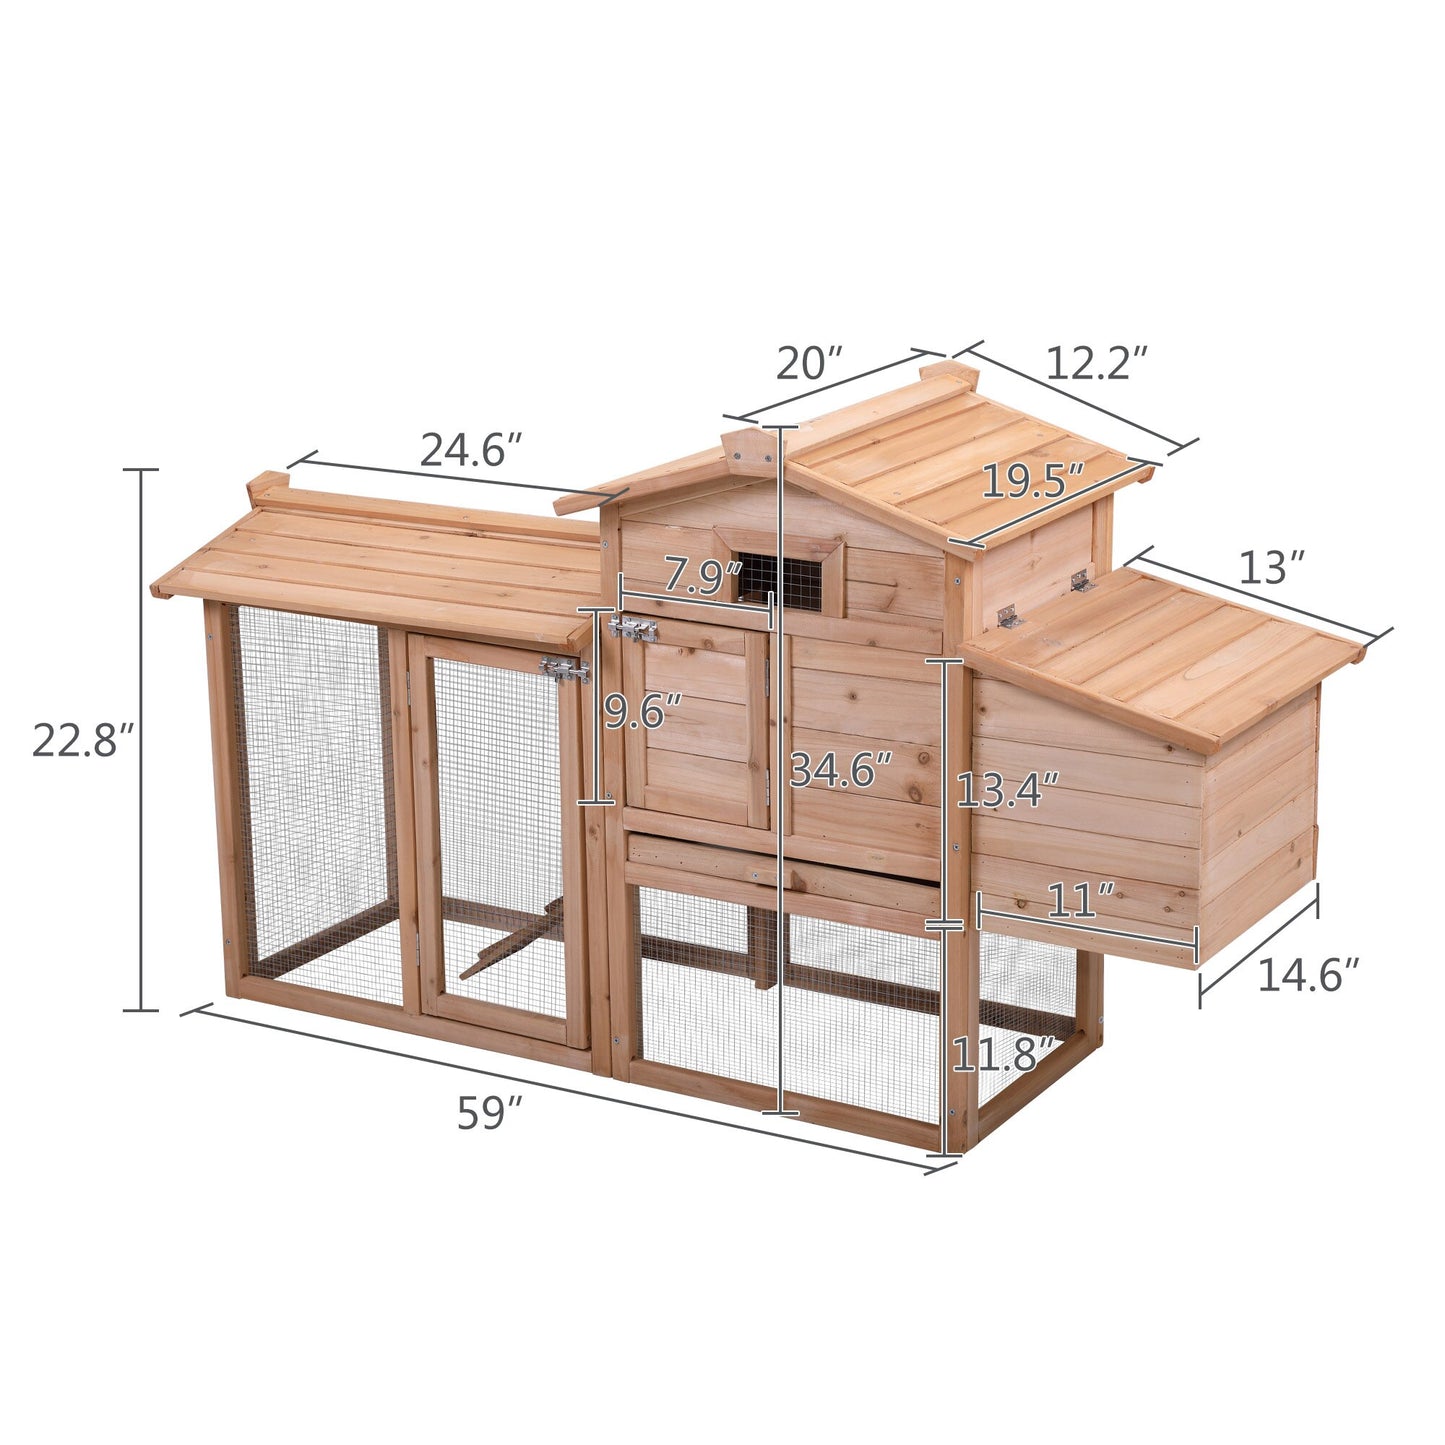 Rabbit Hutch Chicken Coop Outdoor Wooden Pet Bunny House with Ventilation Gridding Fences Openable Door Crib for 2 Rabbits